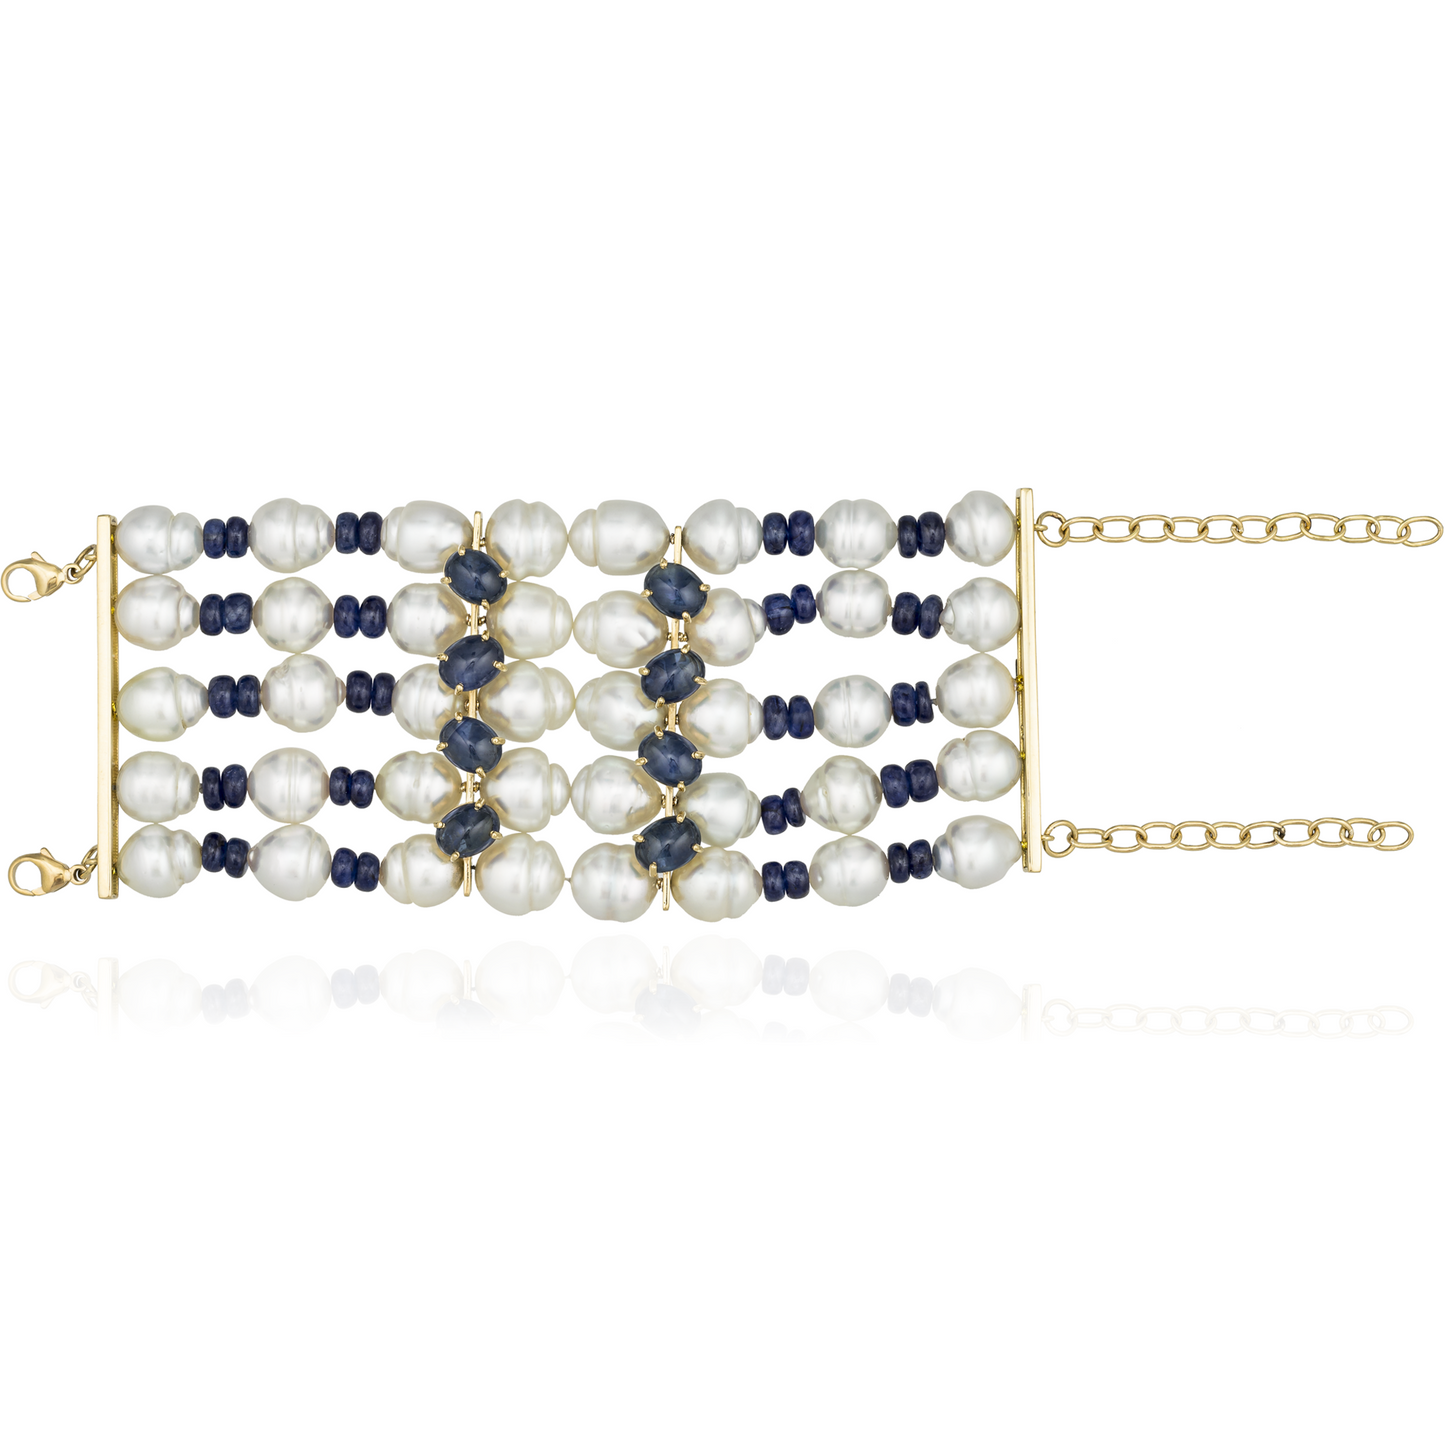 18KT Yellow Gold Bracelet with White South Sea Pearls